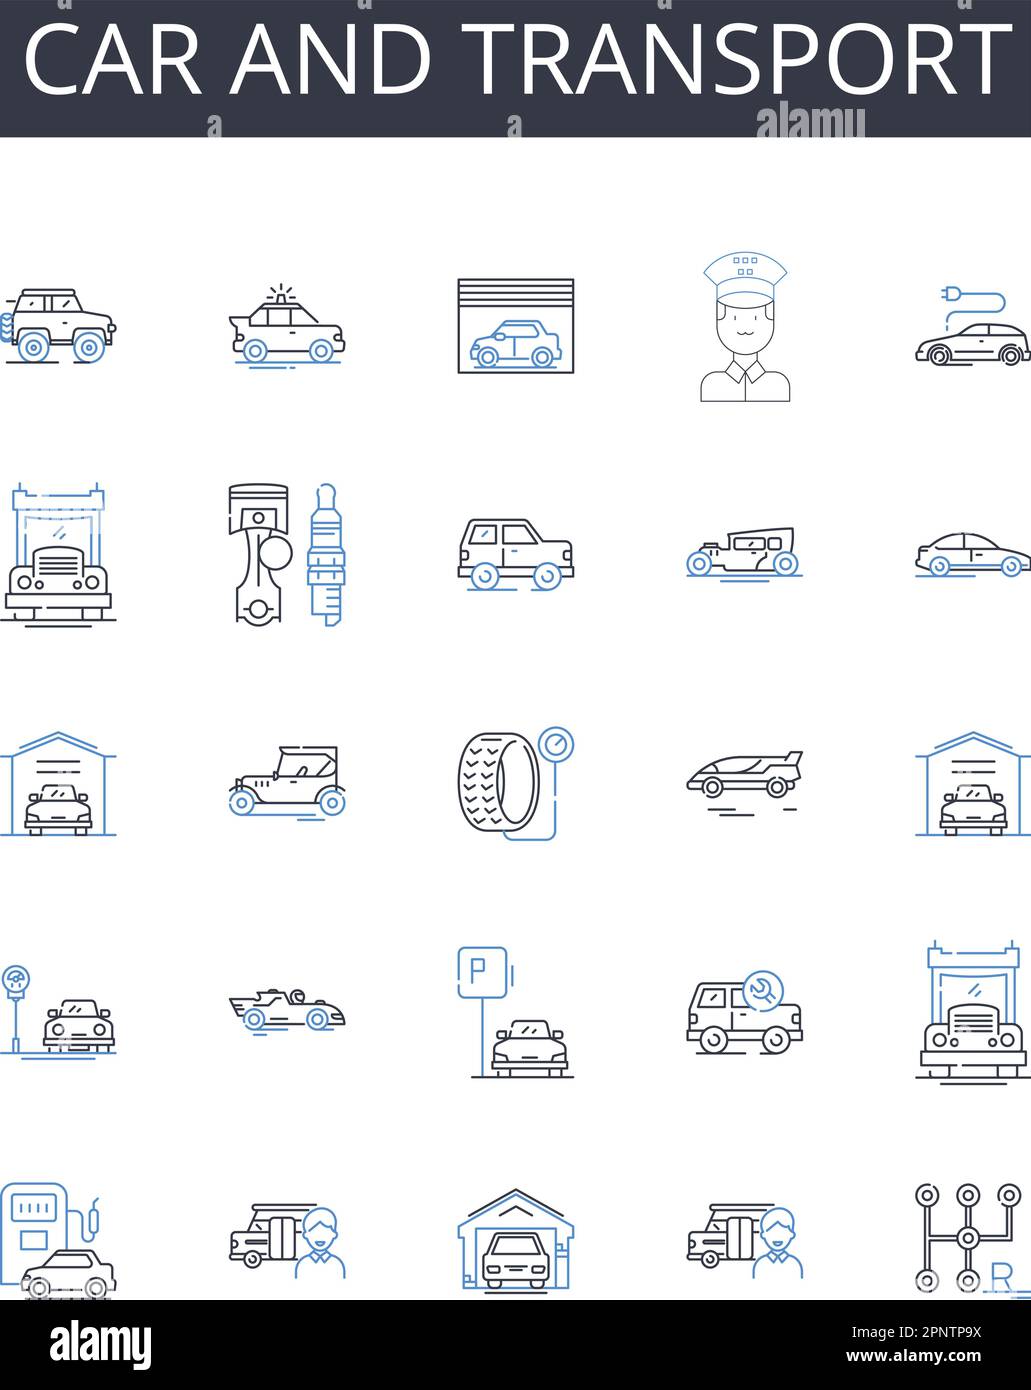 Car and transport line icons collection. Automobile, Vehicle, Truck, Van, Bus, Bike, Motorcycle vector and linear illustration. Scooter,Trailer,Camper Stock Vector